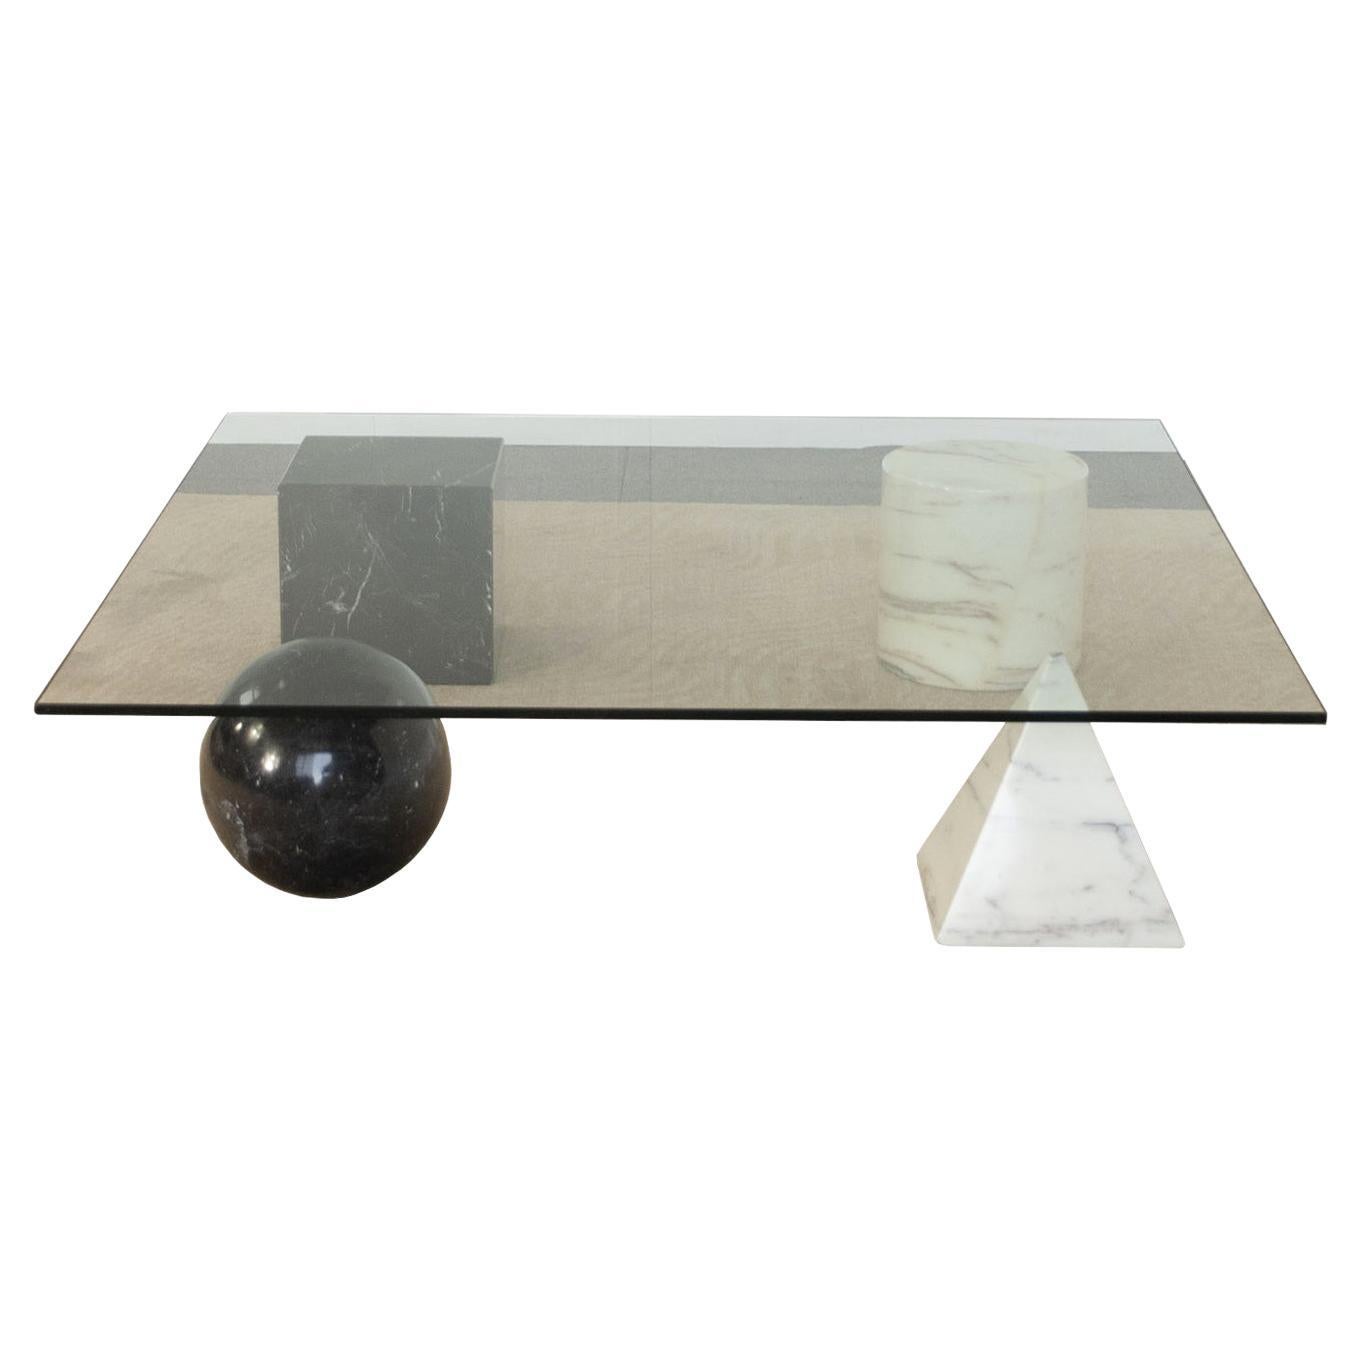 Metafora coffee table by Gianni Vignelli For Sale